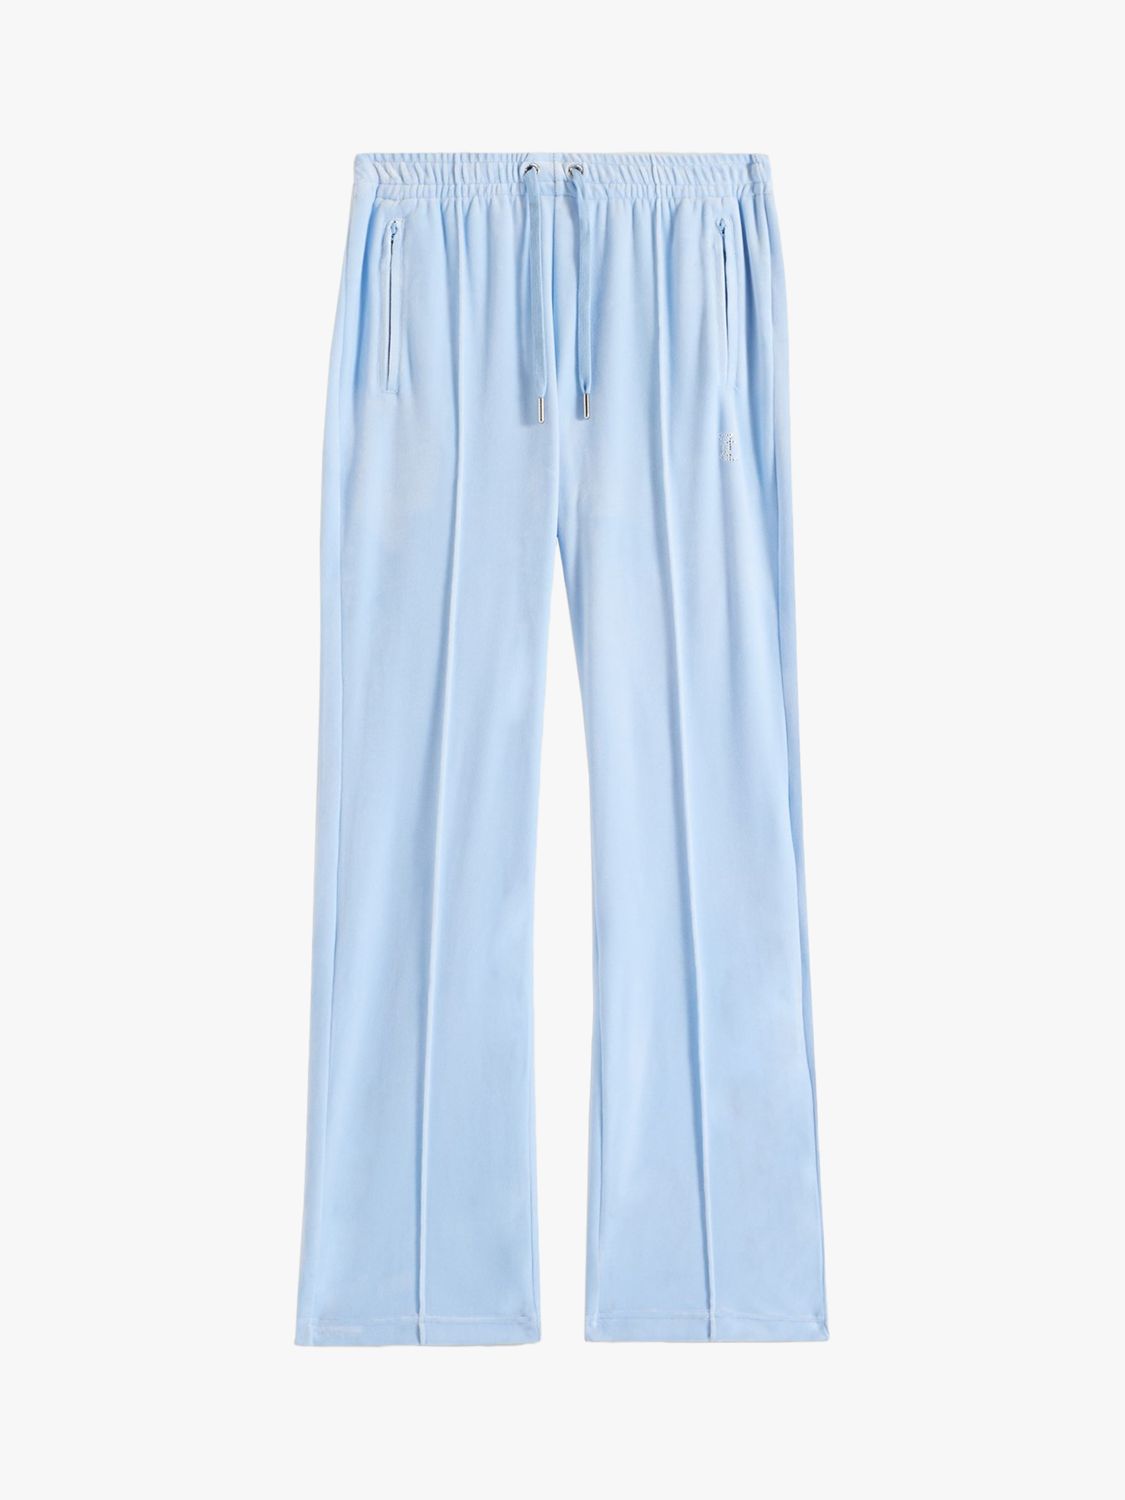 Juicy Couture Diamante Embellished Velour Track Joggers, Powder Blue, M